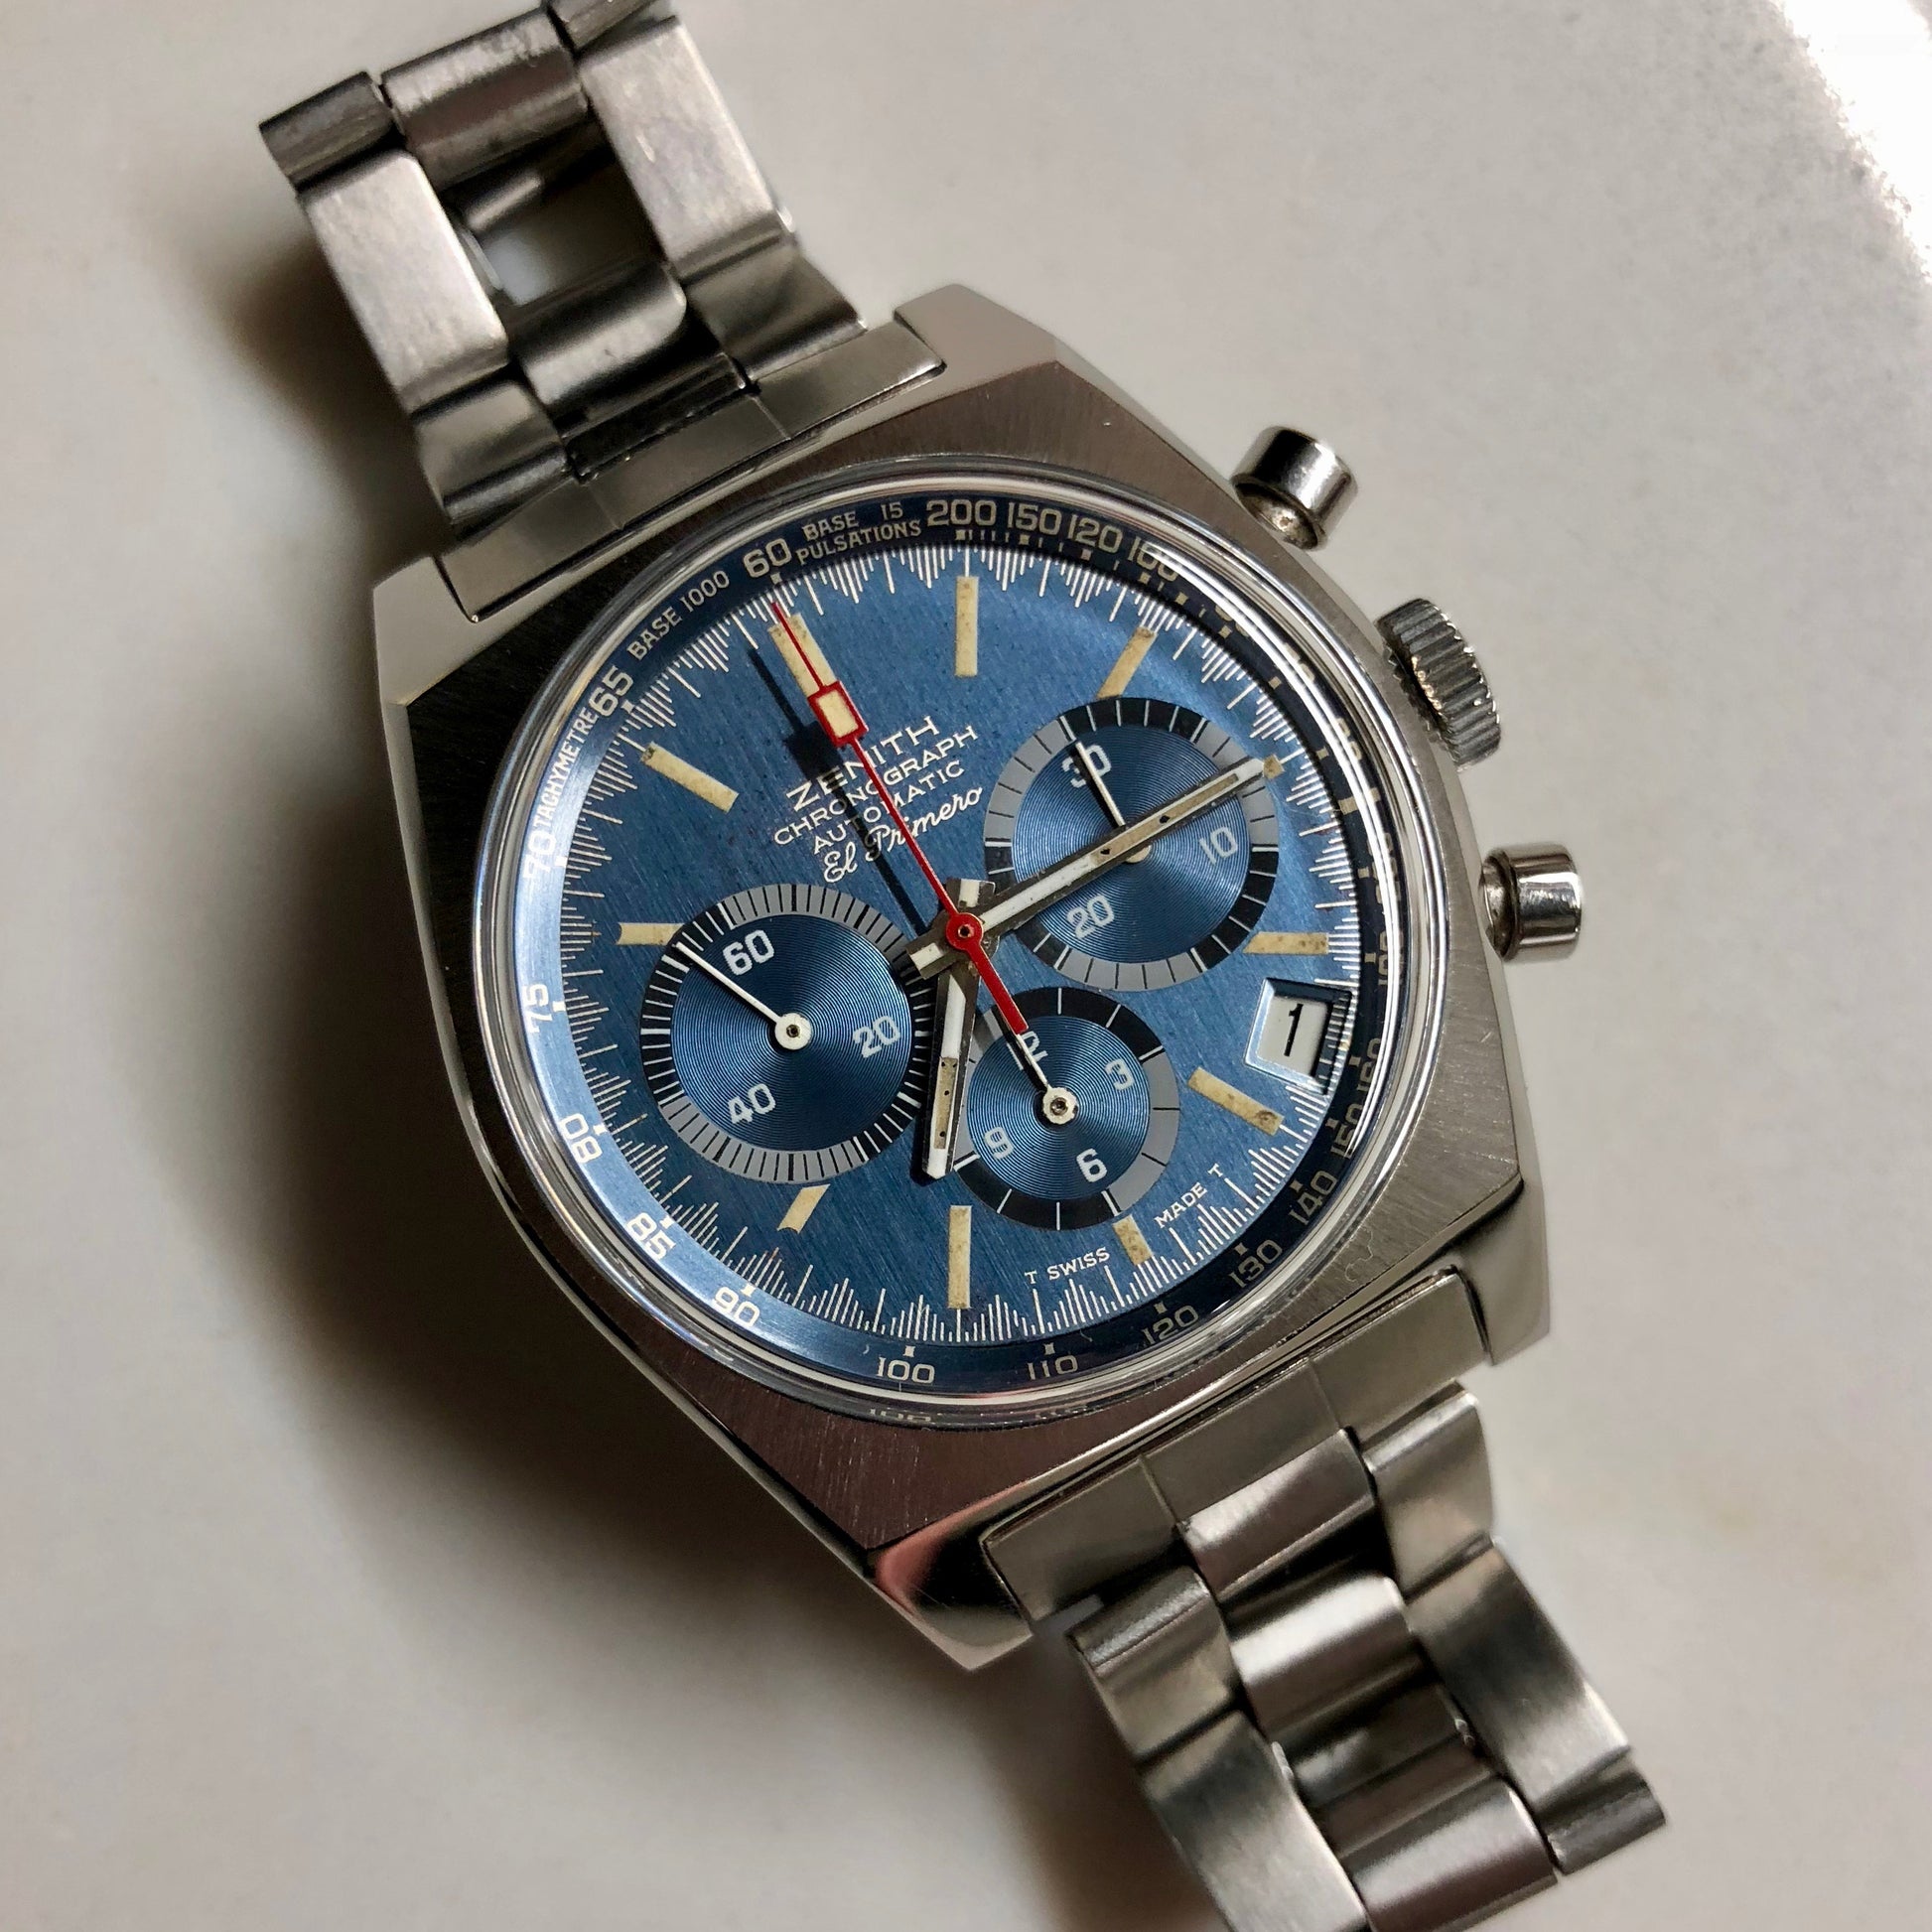 Vintage Zenith El Primero Cover Girl A3818 Steel Chronograph Automatic Gay Freres Wristwatch - Hashtag Watch Company